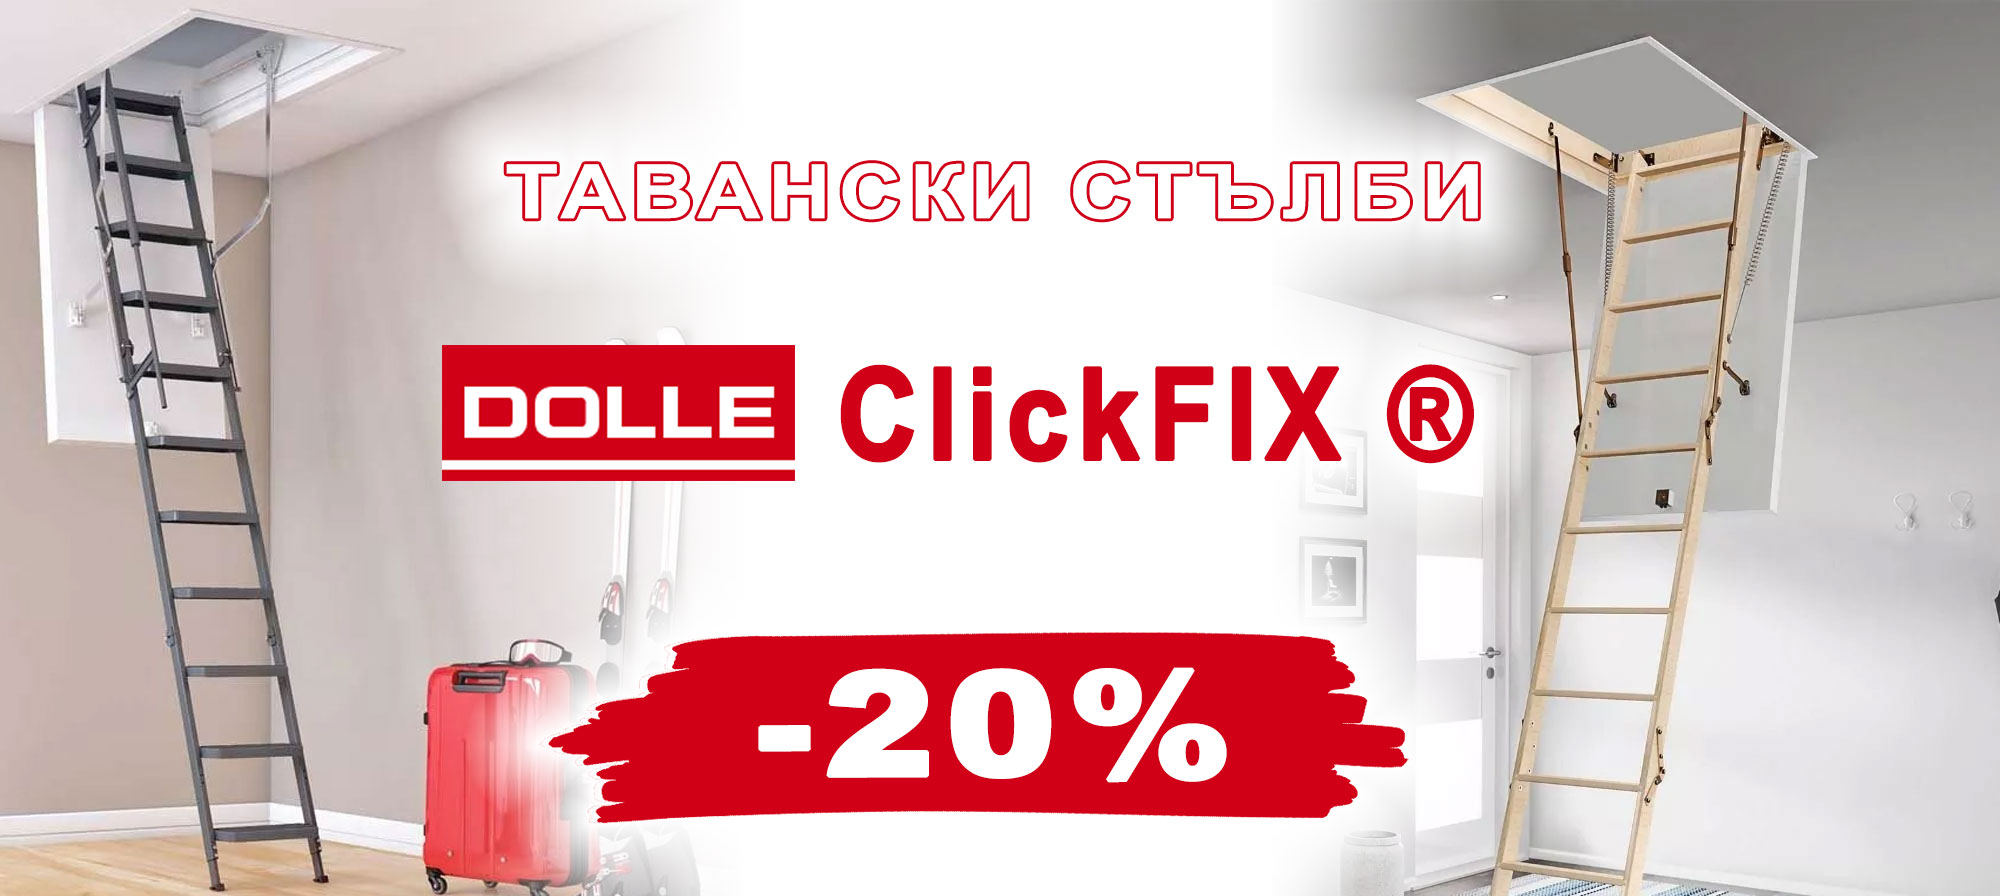 DOLLE ClickFIX ® attic ladders with a 20% discount